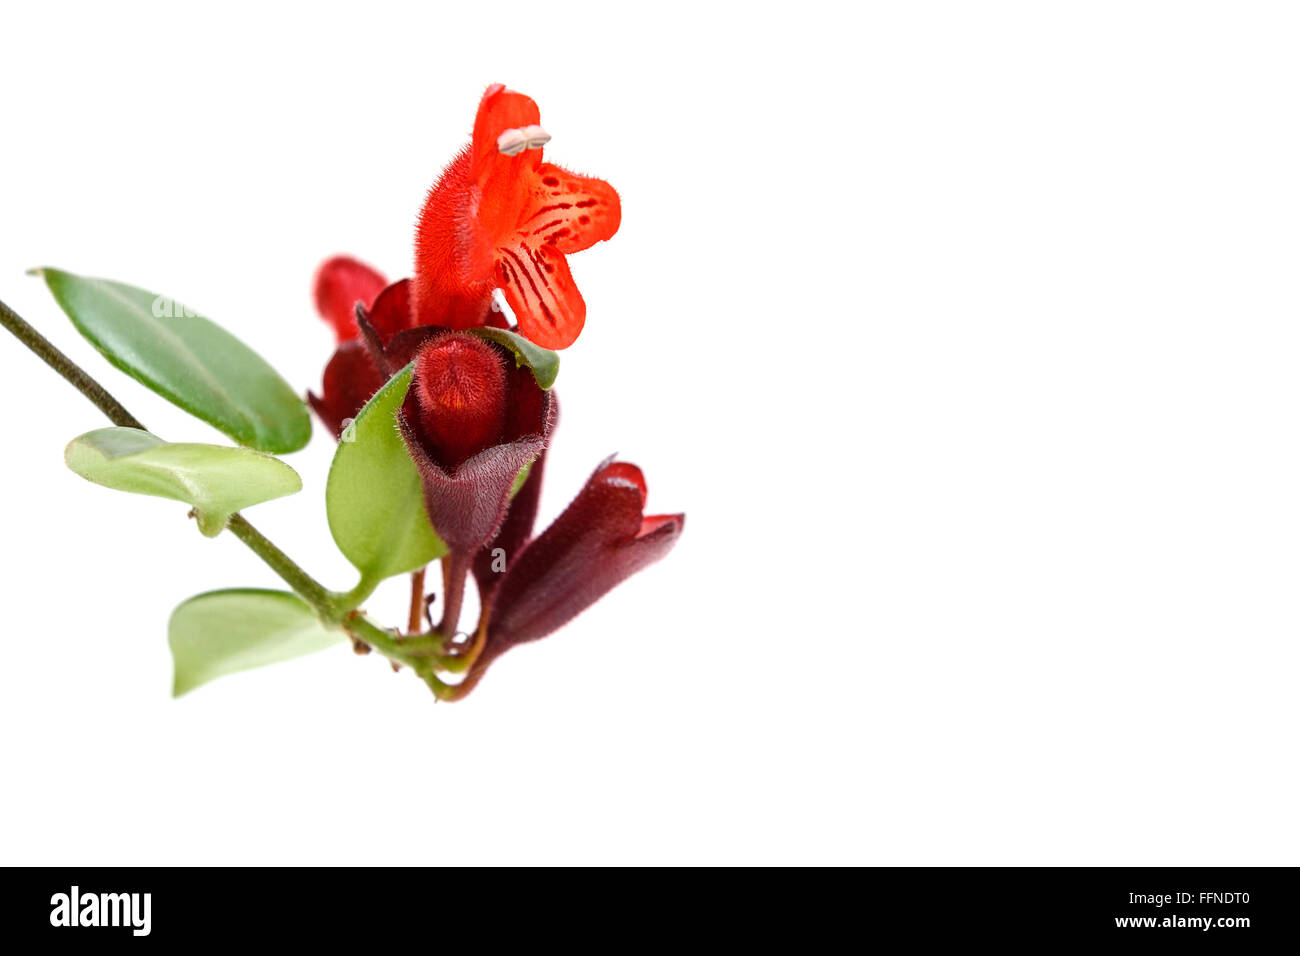 Red Lipstick flower. Aeschynanthus radicans. Isolated on white background Stock Photo